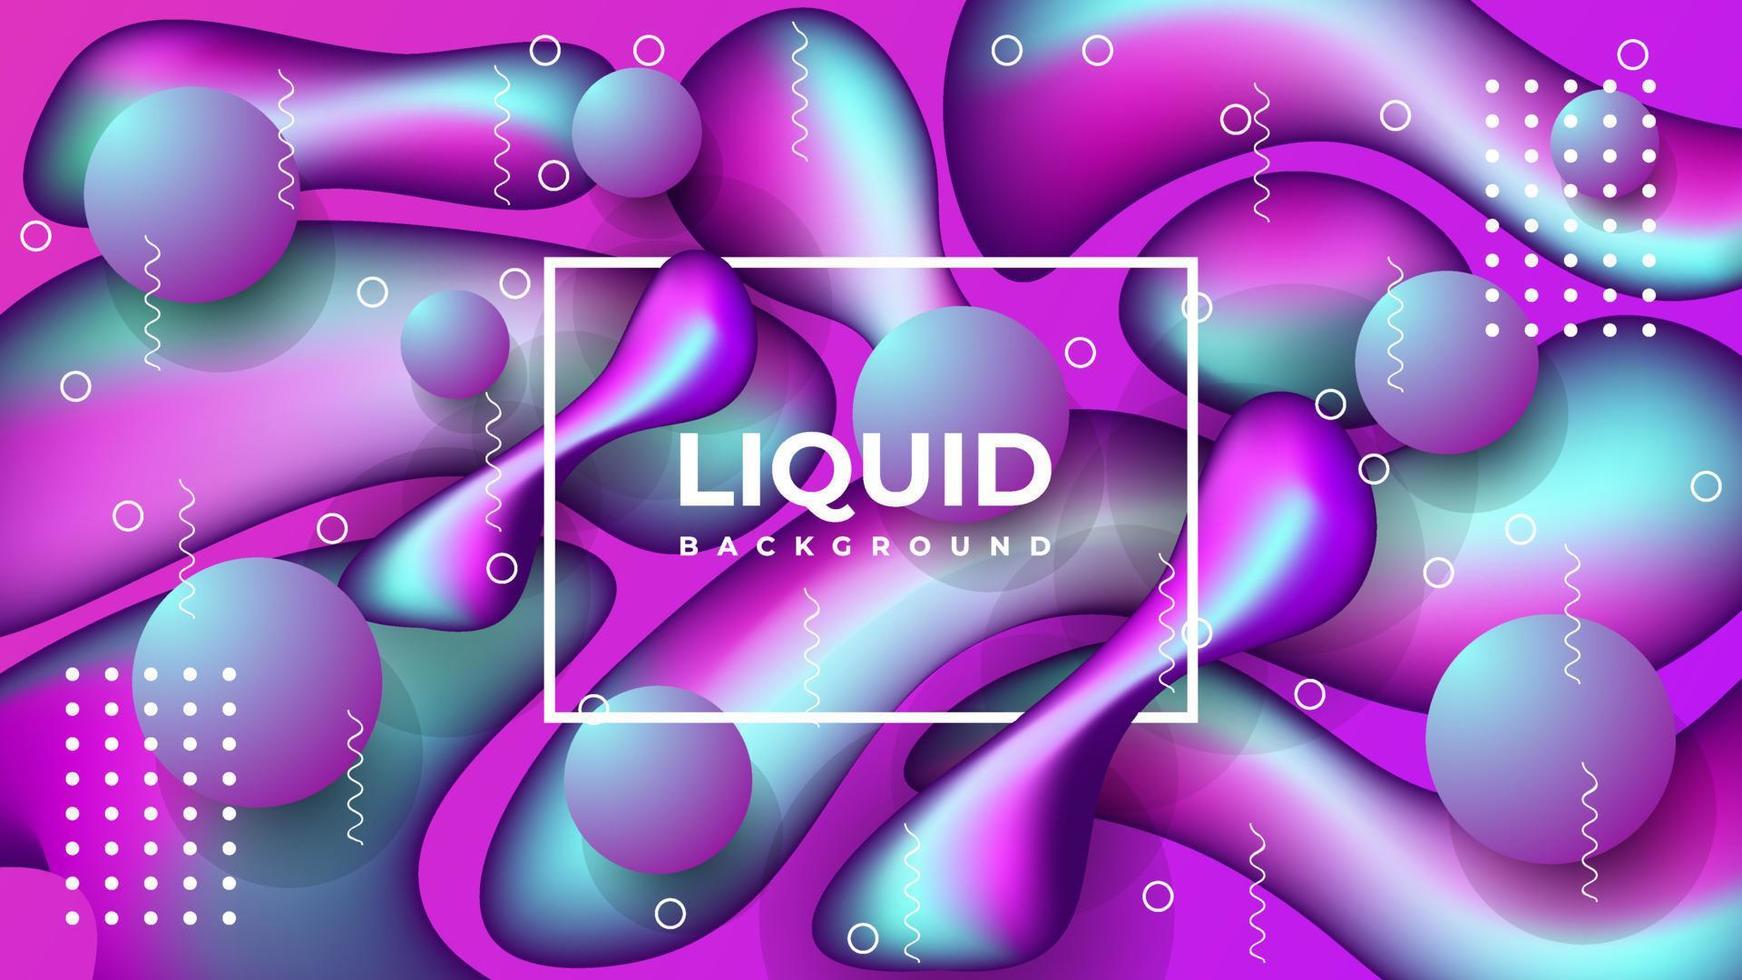 New Abstract Liquid colorful Background design template vector